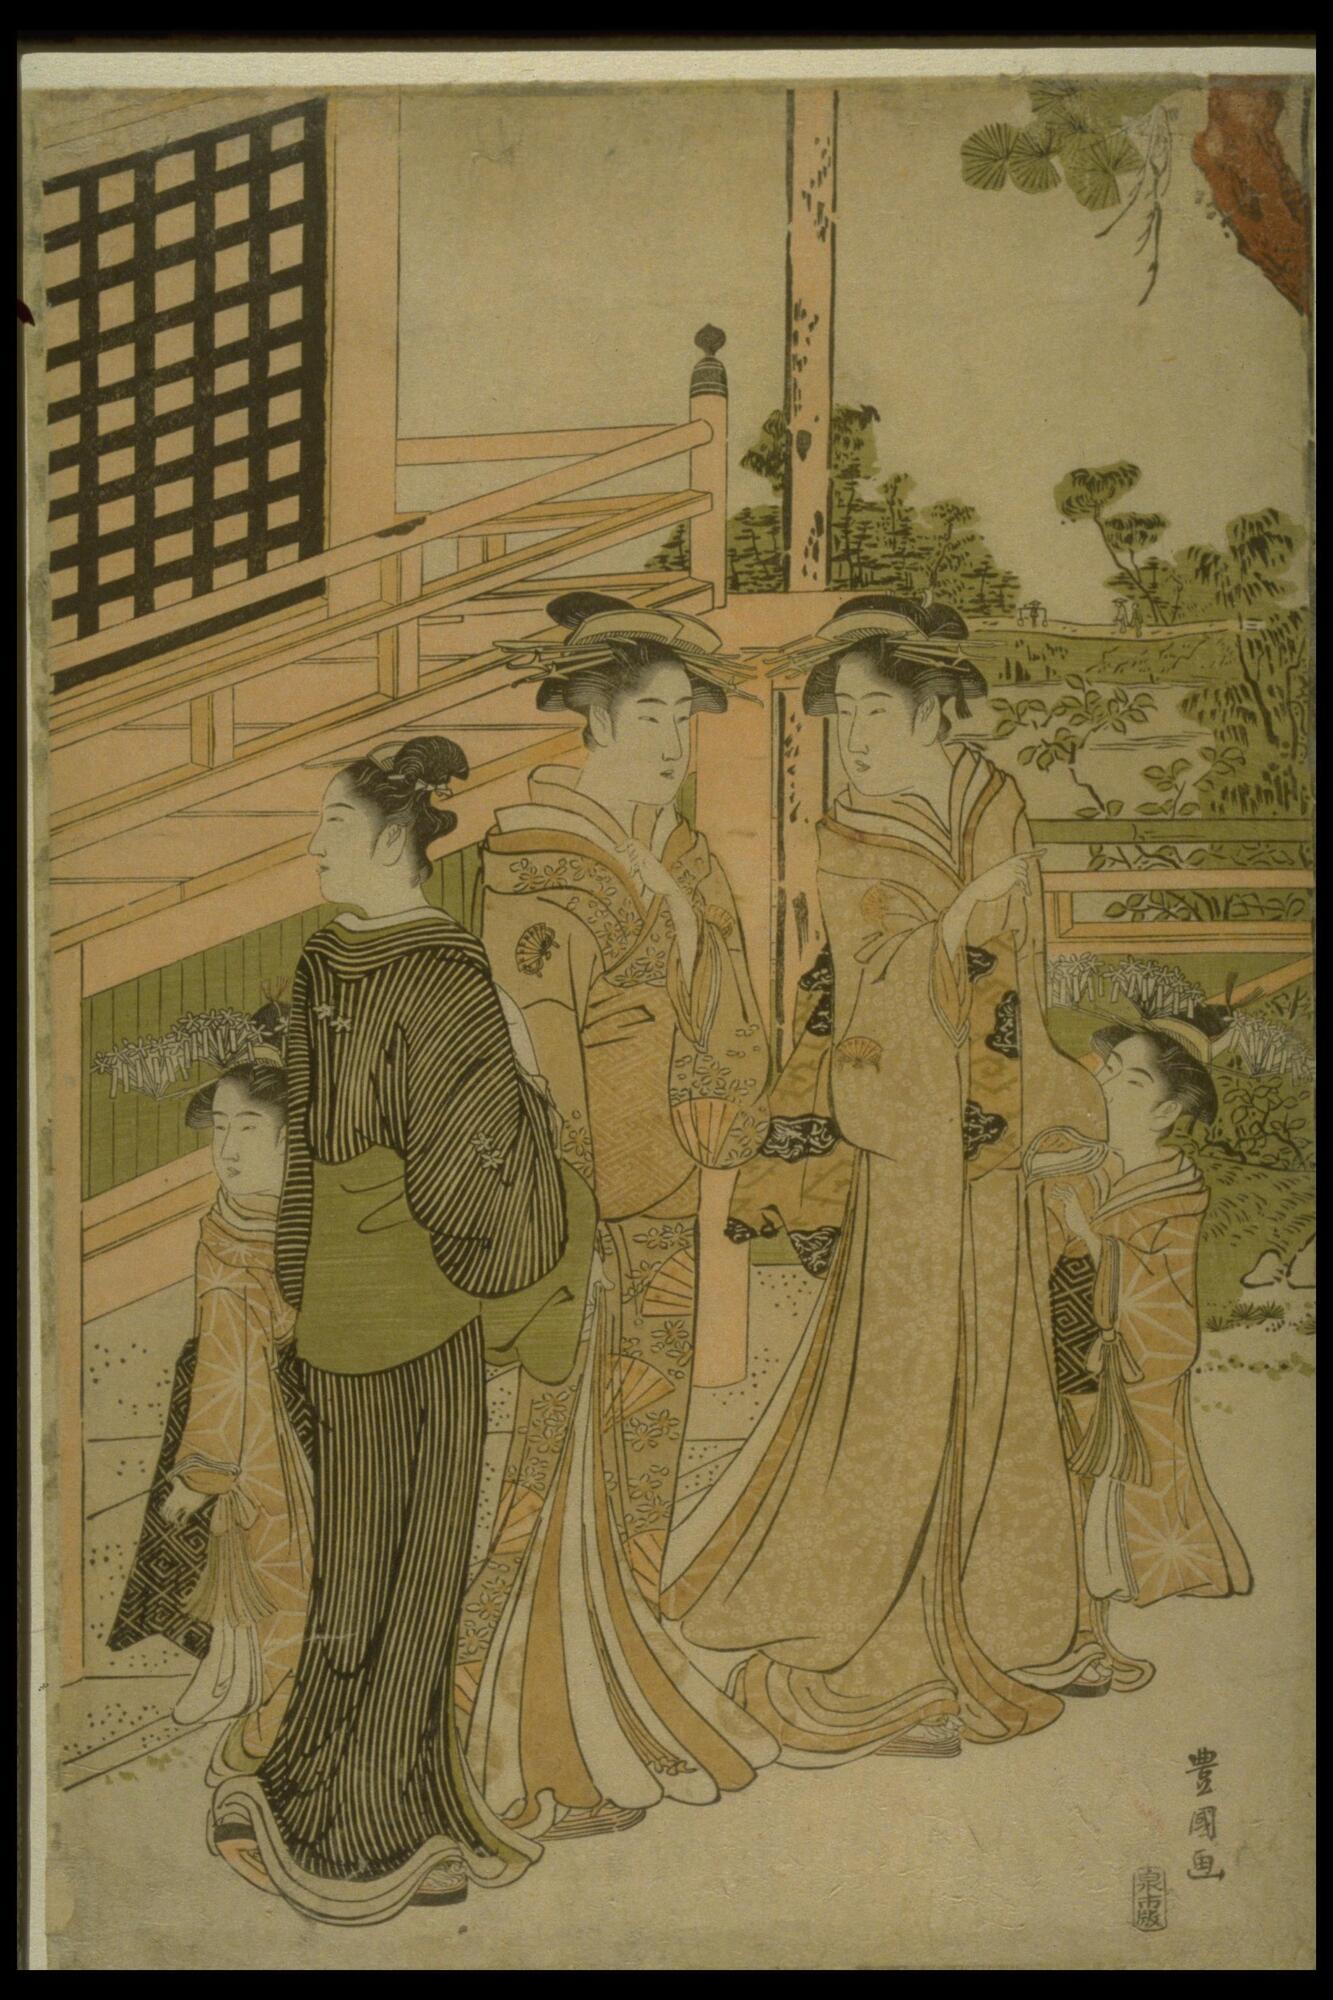 An image of three older women and two young girls standing together outside of a building. The woman to the left wears a plain kimono of black stripes and a green obi. The two women in the center wear layered kimono of orange shades, with the woman on the right wearing star burst designs and the woman on the left wearing a fan and flower design. The two young girls also wear kimono of orange and a different style of star burst pattern. In the background is a scene of trees and a pond.